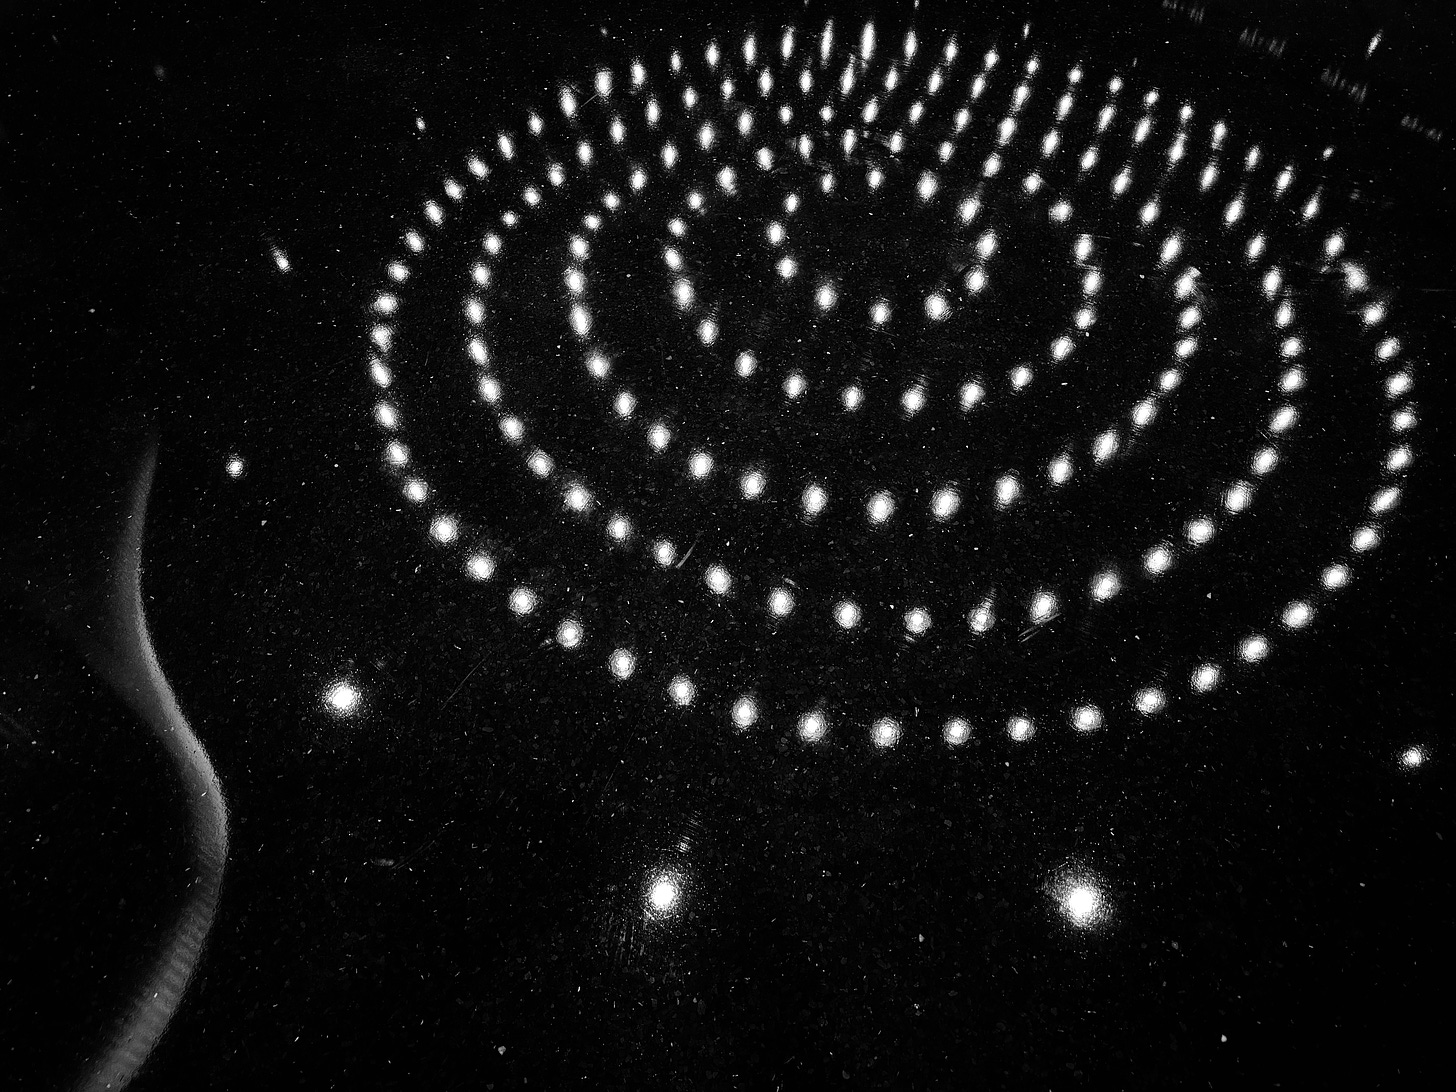 Per ChatGPT: The image is a black and white photograph showing a pattern of lights arranged in concentric circles. The lights appear to be small and bright against a dark background, giving the impression of being stars or possibly lights from a man-made structure reflected on a surface. The exact nature of the surface is unclear, but it could be water, glass, or another reflective material given the clear reflections and the way the lights diminish in intensity with distance. There is a swirled pattern that disrupts the concentric circles on the left side, adding an element of motion or distortion to the image.